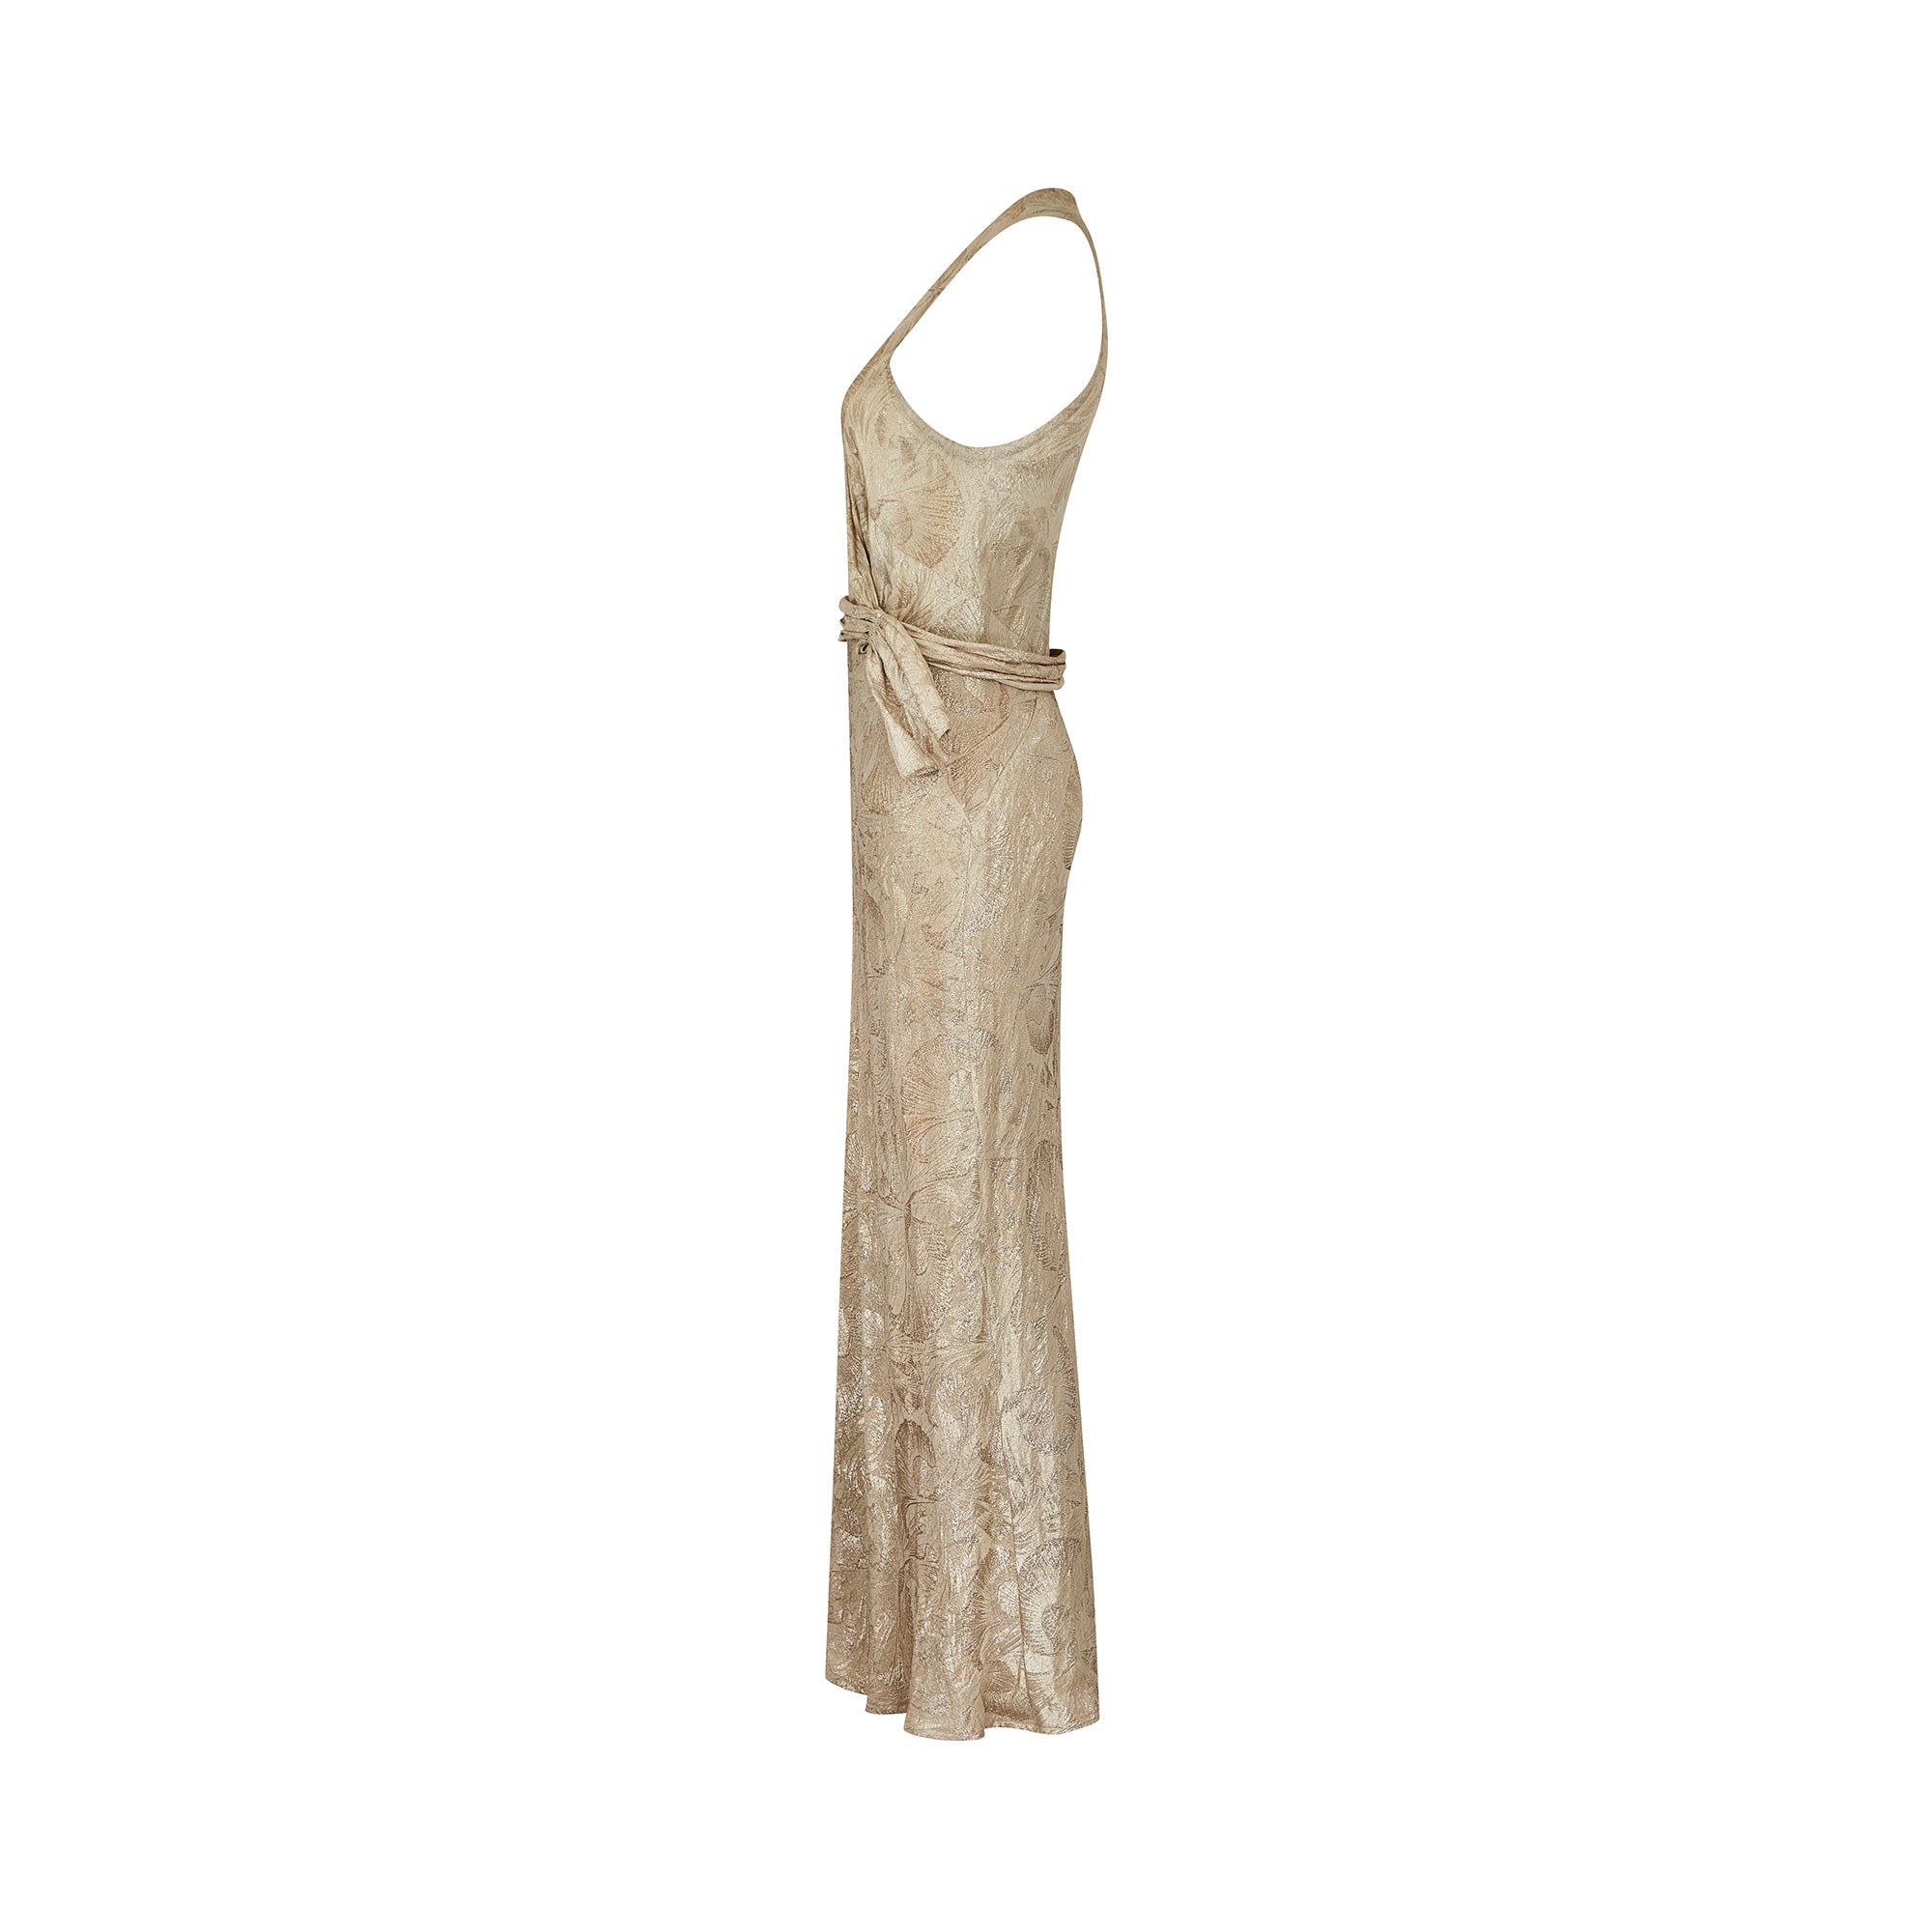 1930s Haute Couture Silver Lame Evening Dress